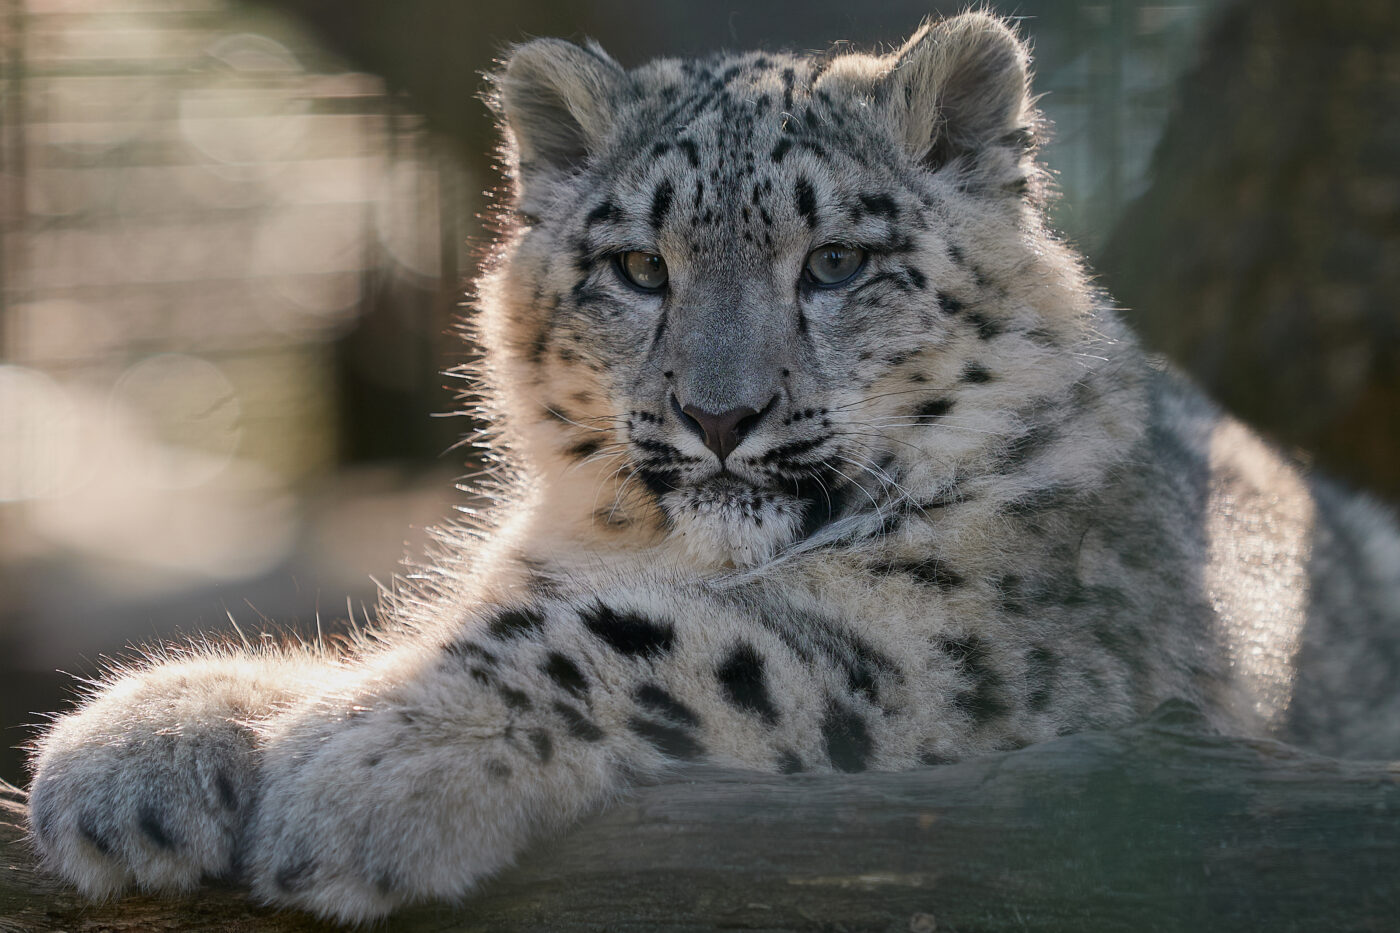 Snow Leopard's at Chester Zoo